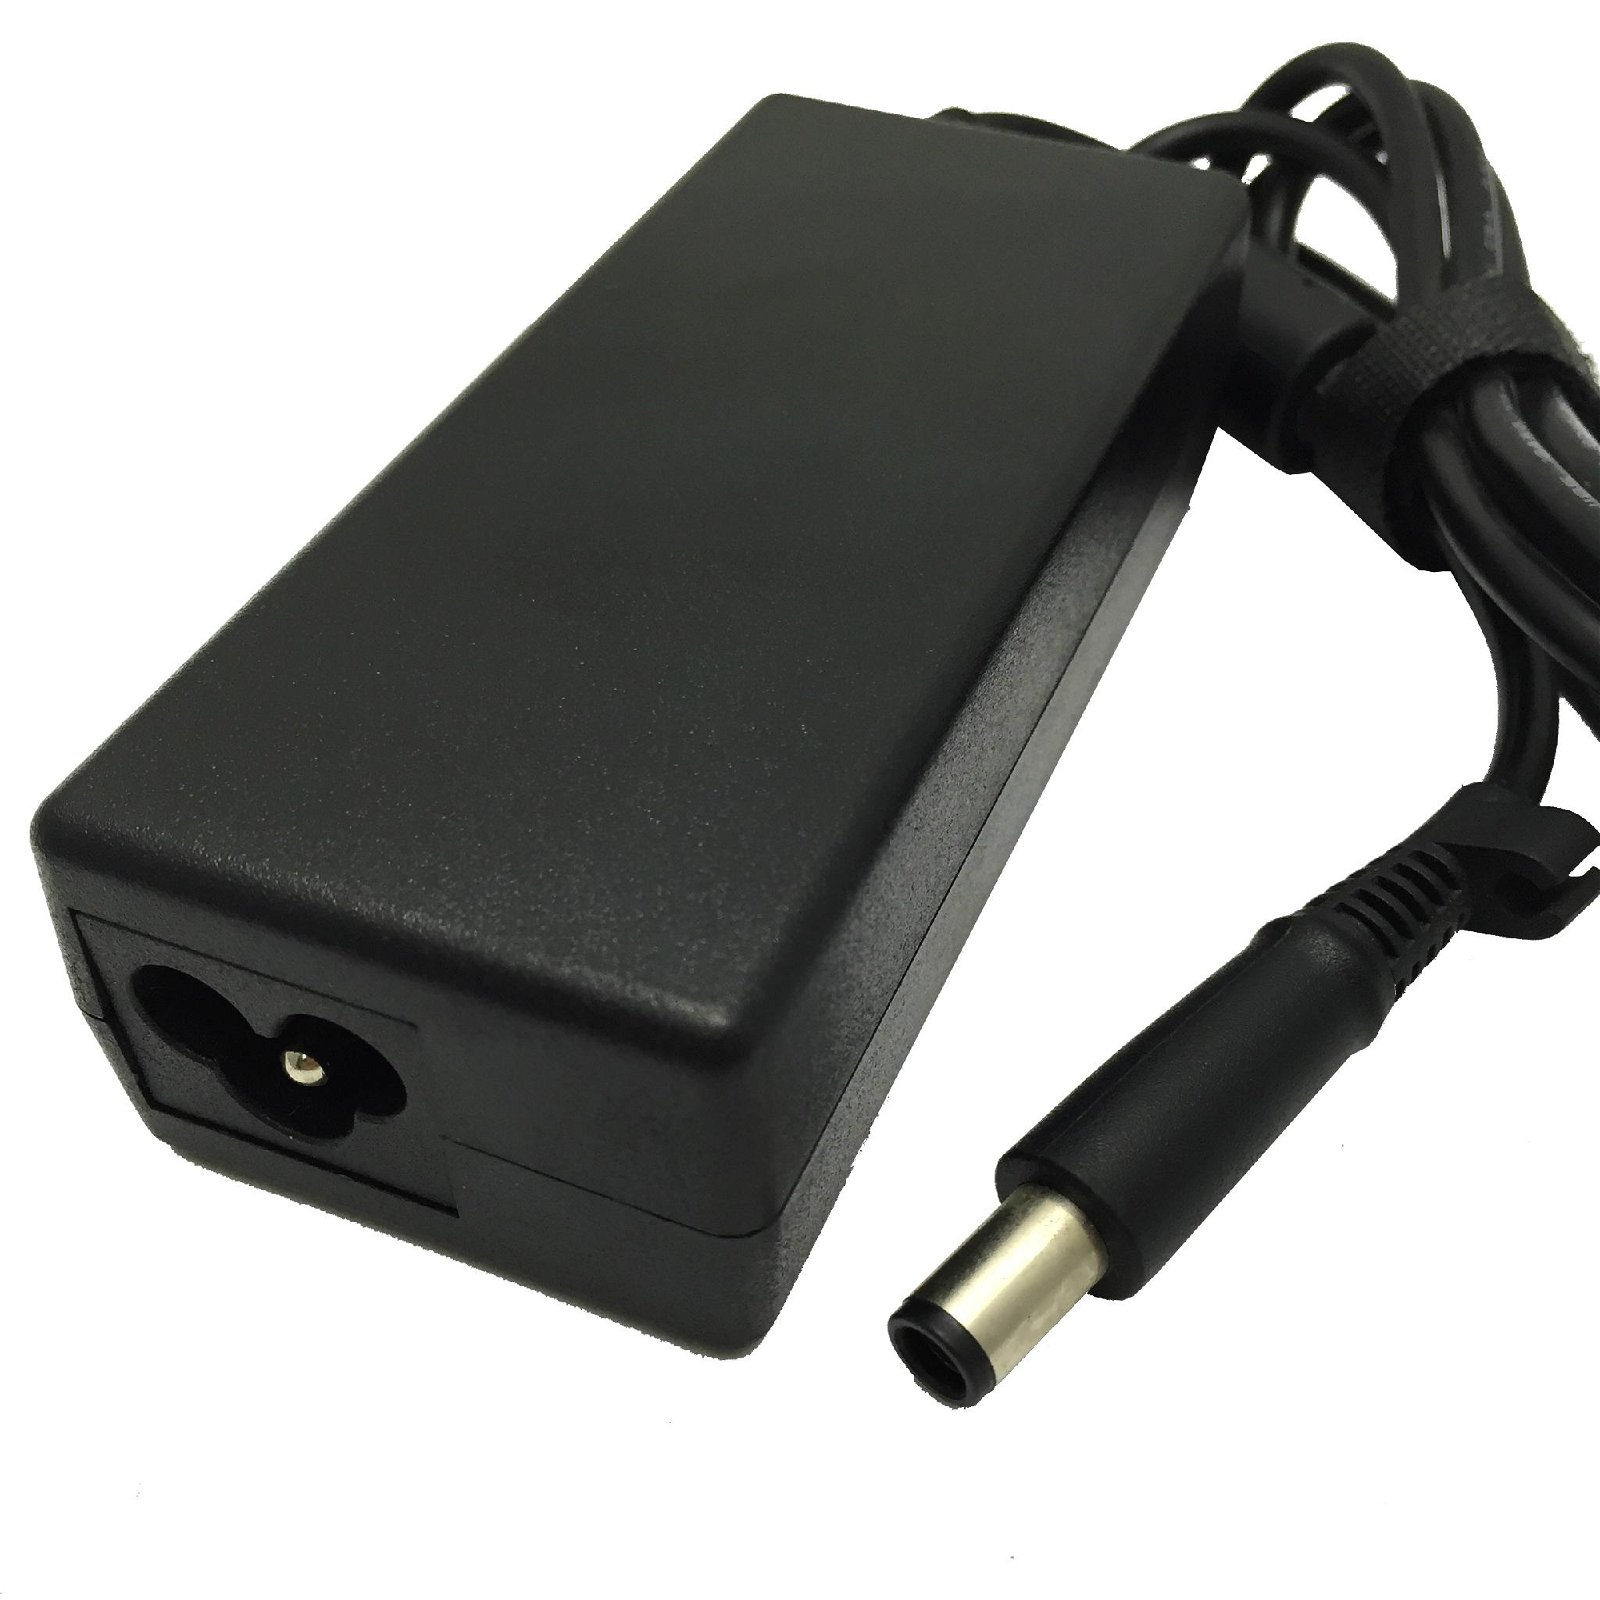 Laptop AC Power Adapter Charger 65w 18.5v 3.5a for DELL 5